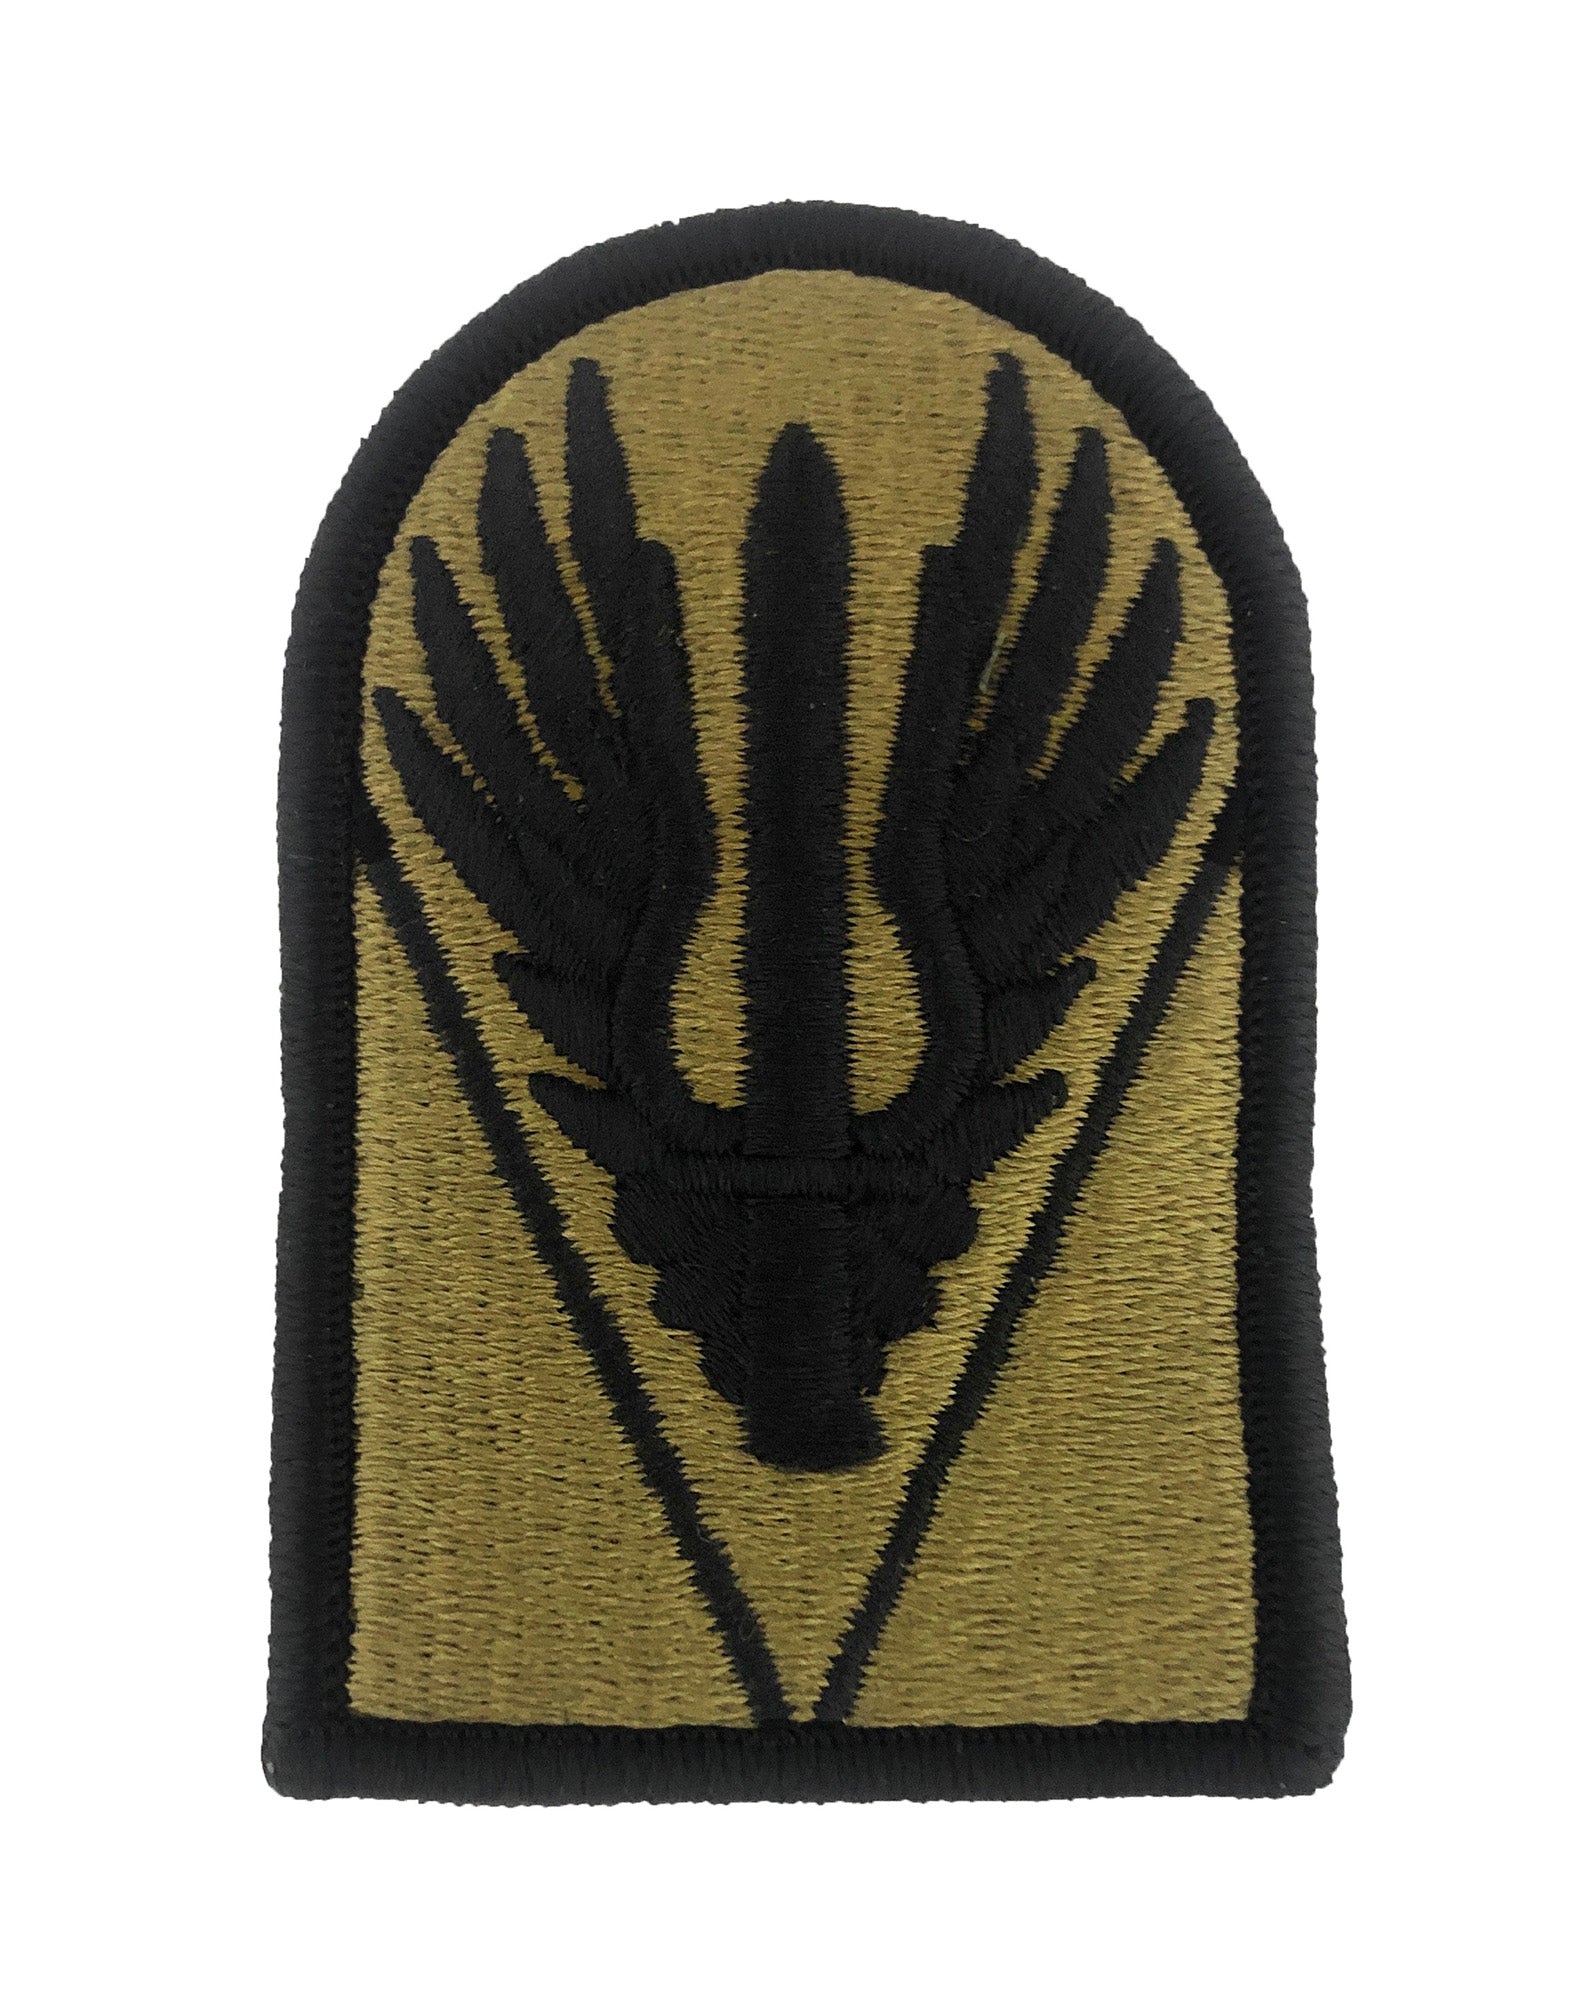 Joint Readiness Training Center OCP Patch W/ Hook Fastener (pair) - Insignia Depot